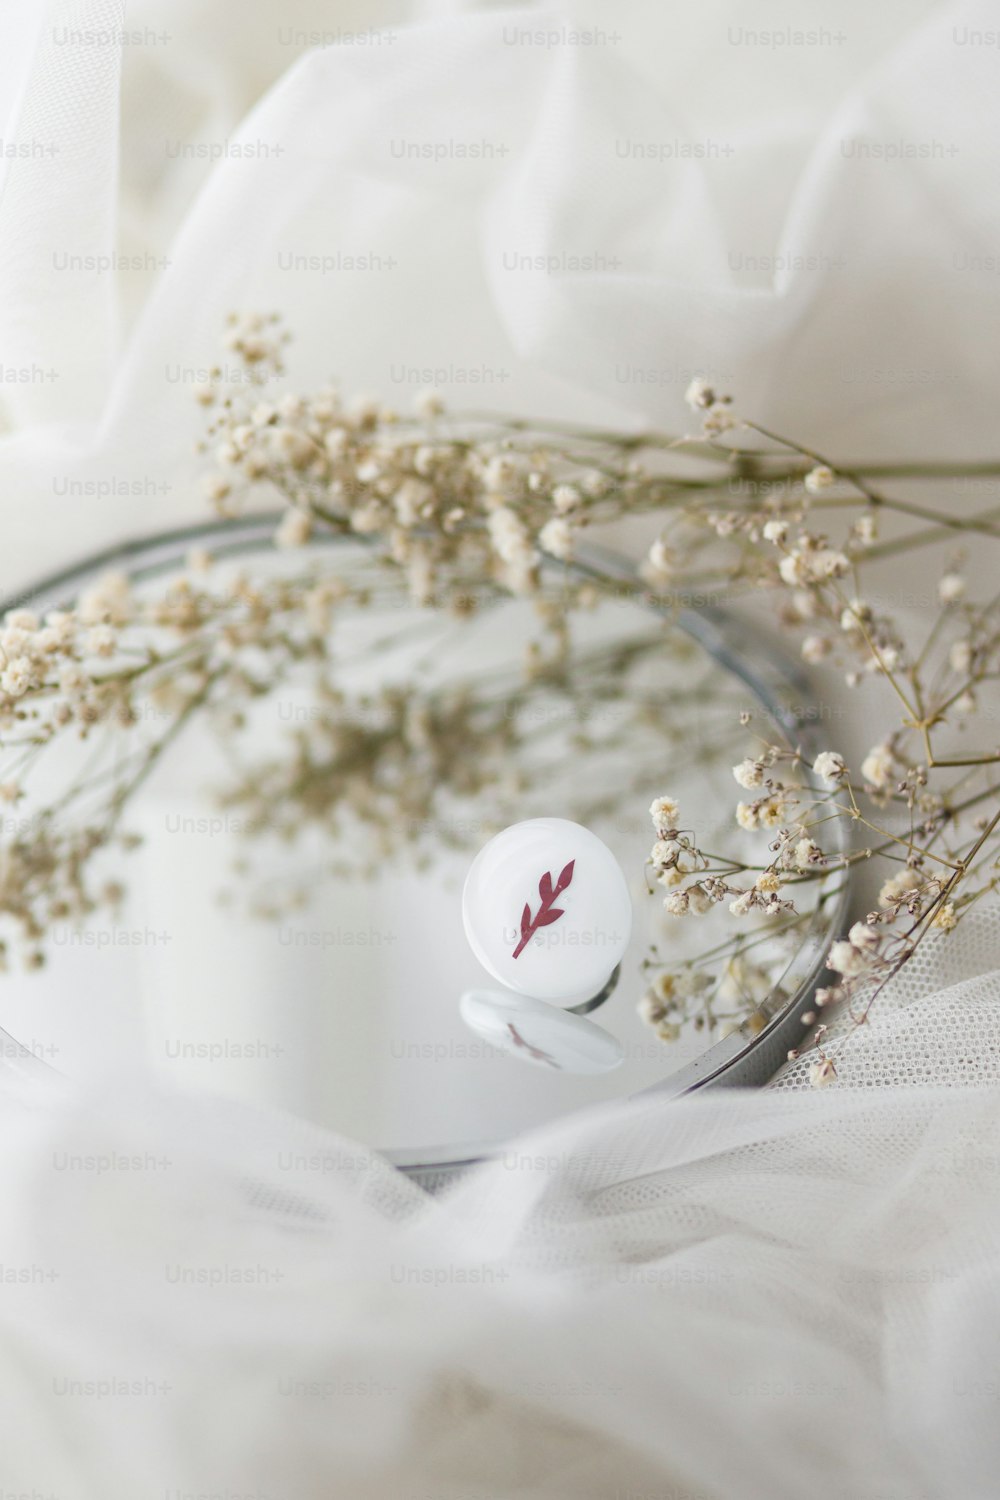 Stylish modern white round ring and dried flowers on mirror on soft white tulle, copy space. Unusual fashionable fused glass ring. Contemporary gift